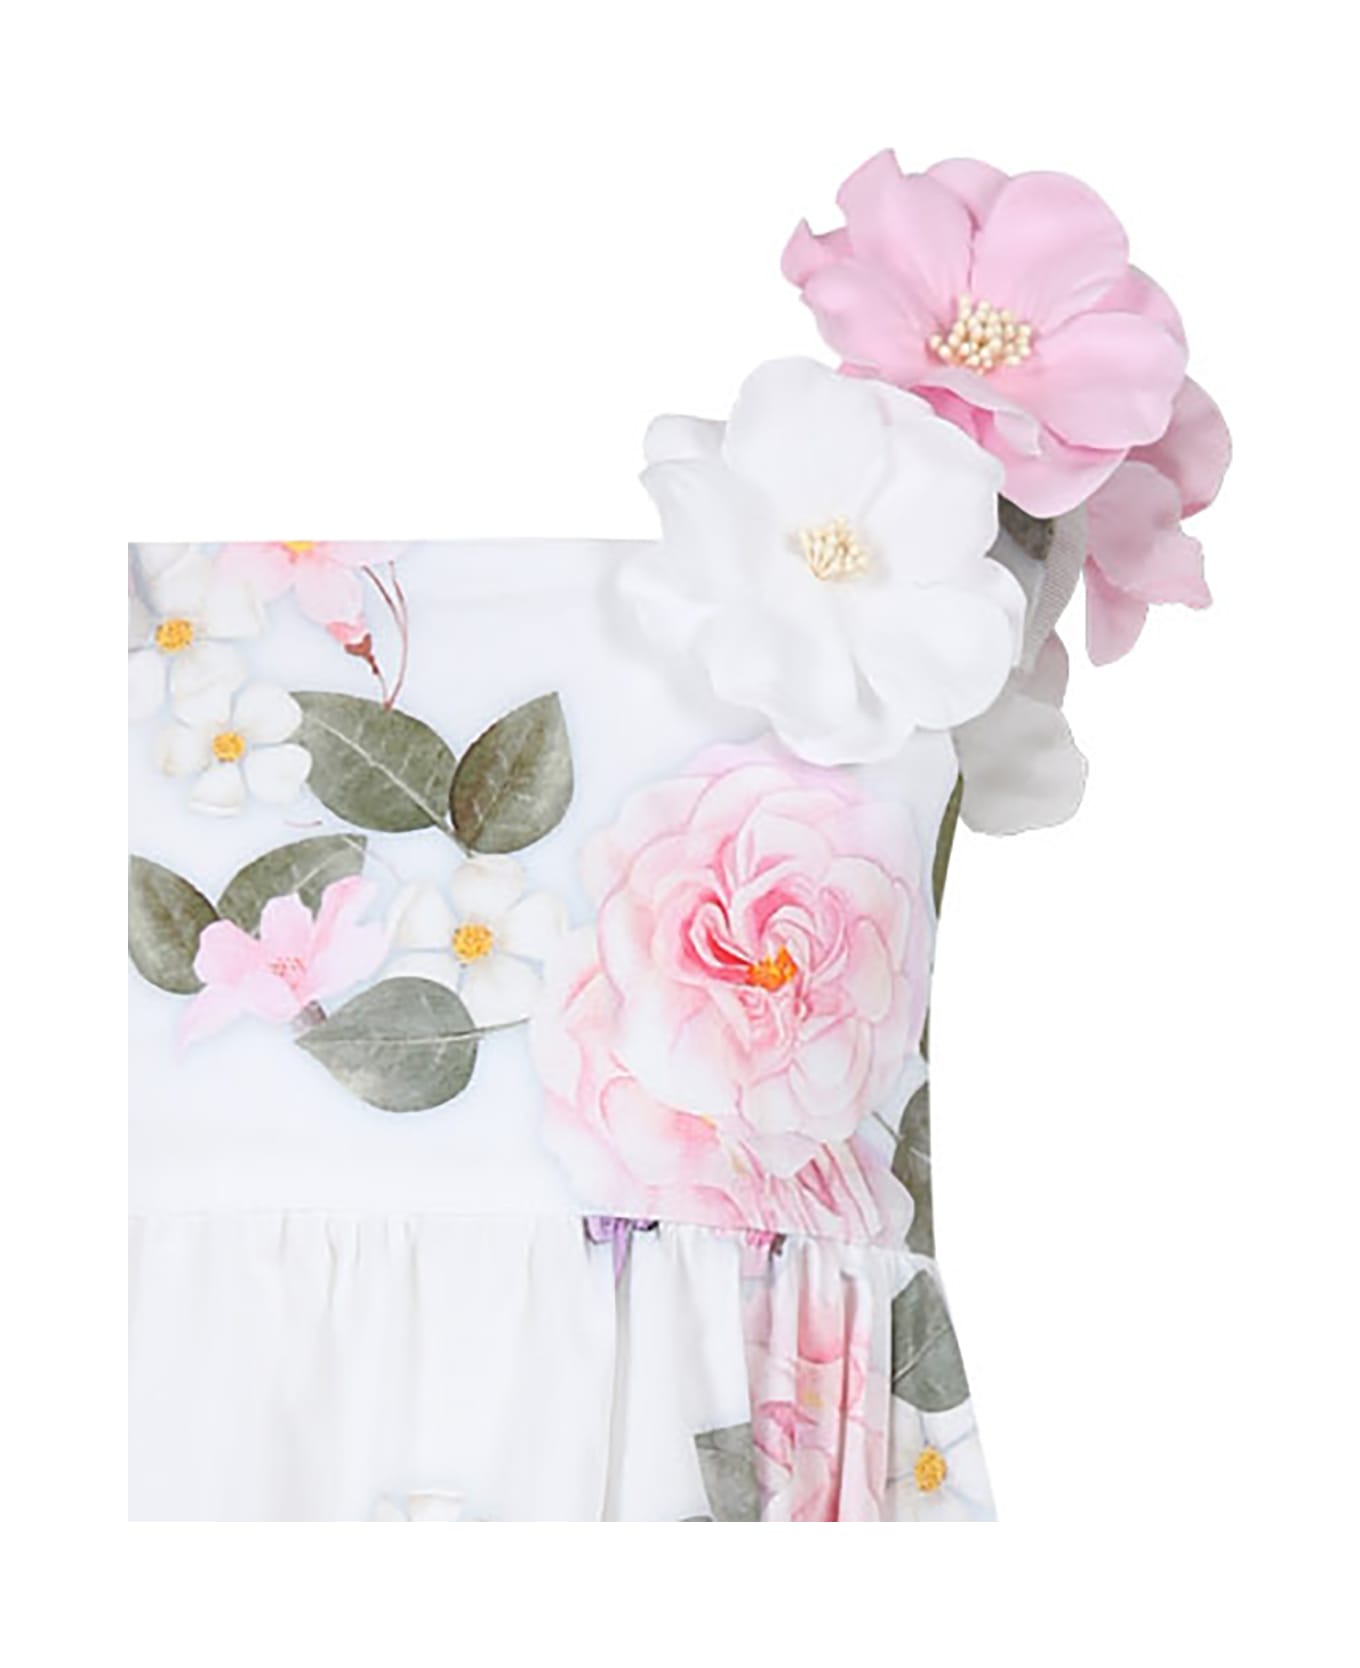 Monnalisa White Dress For Girl With Flowers - WHITE